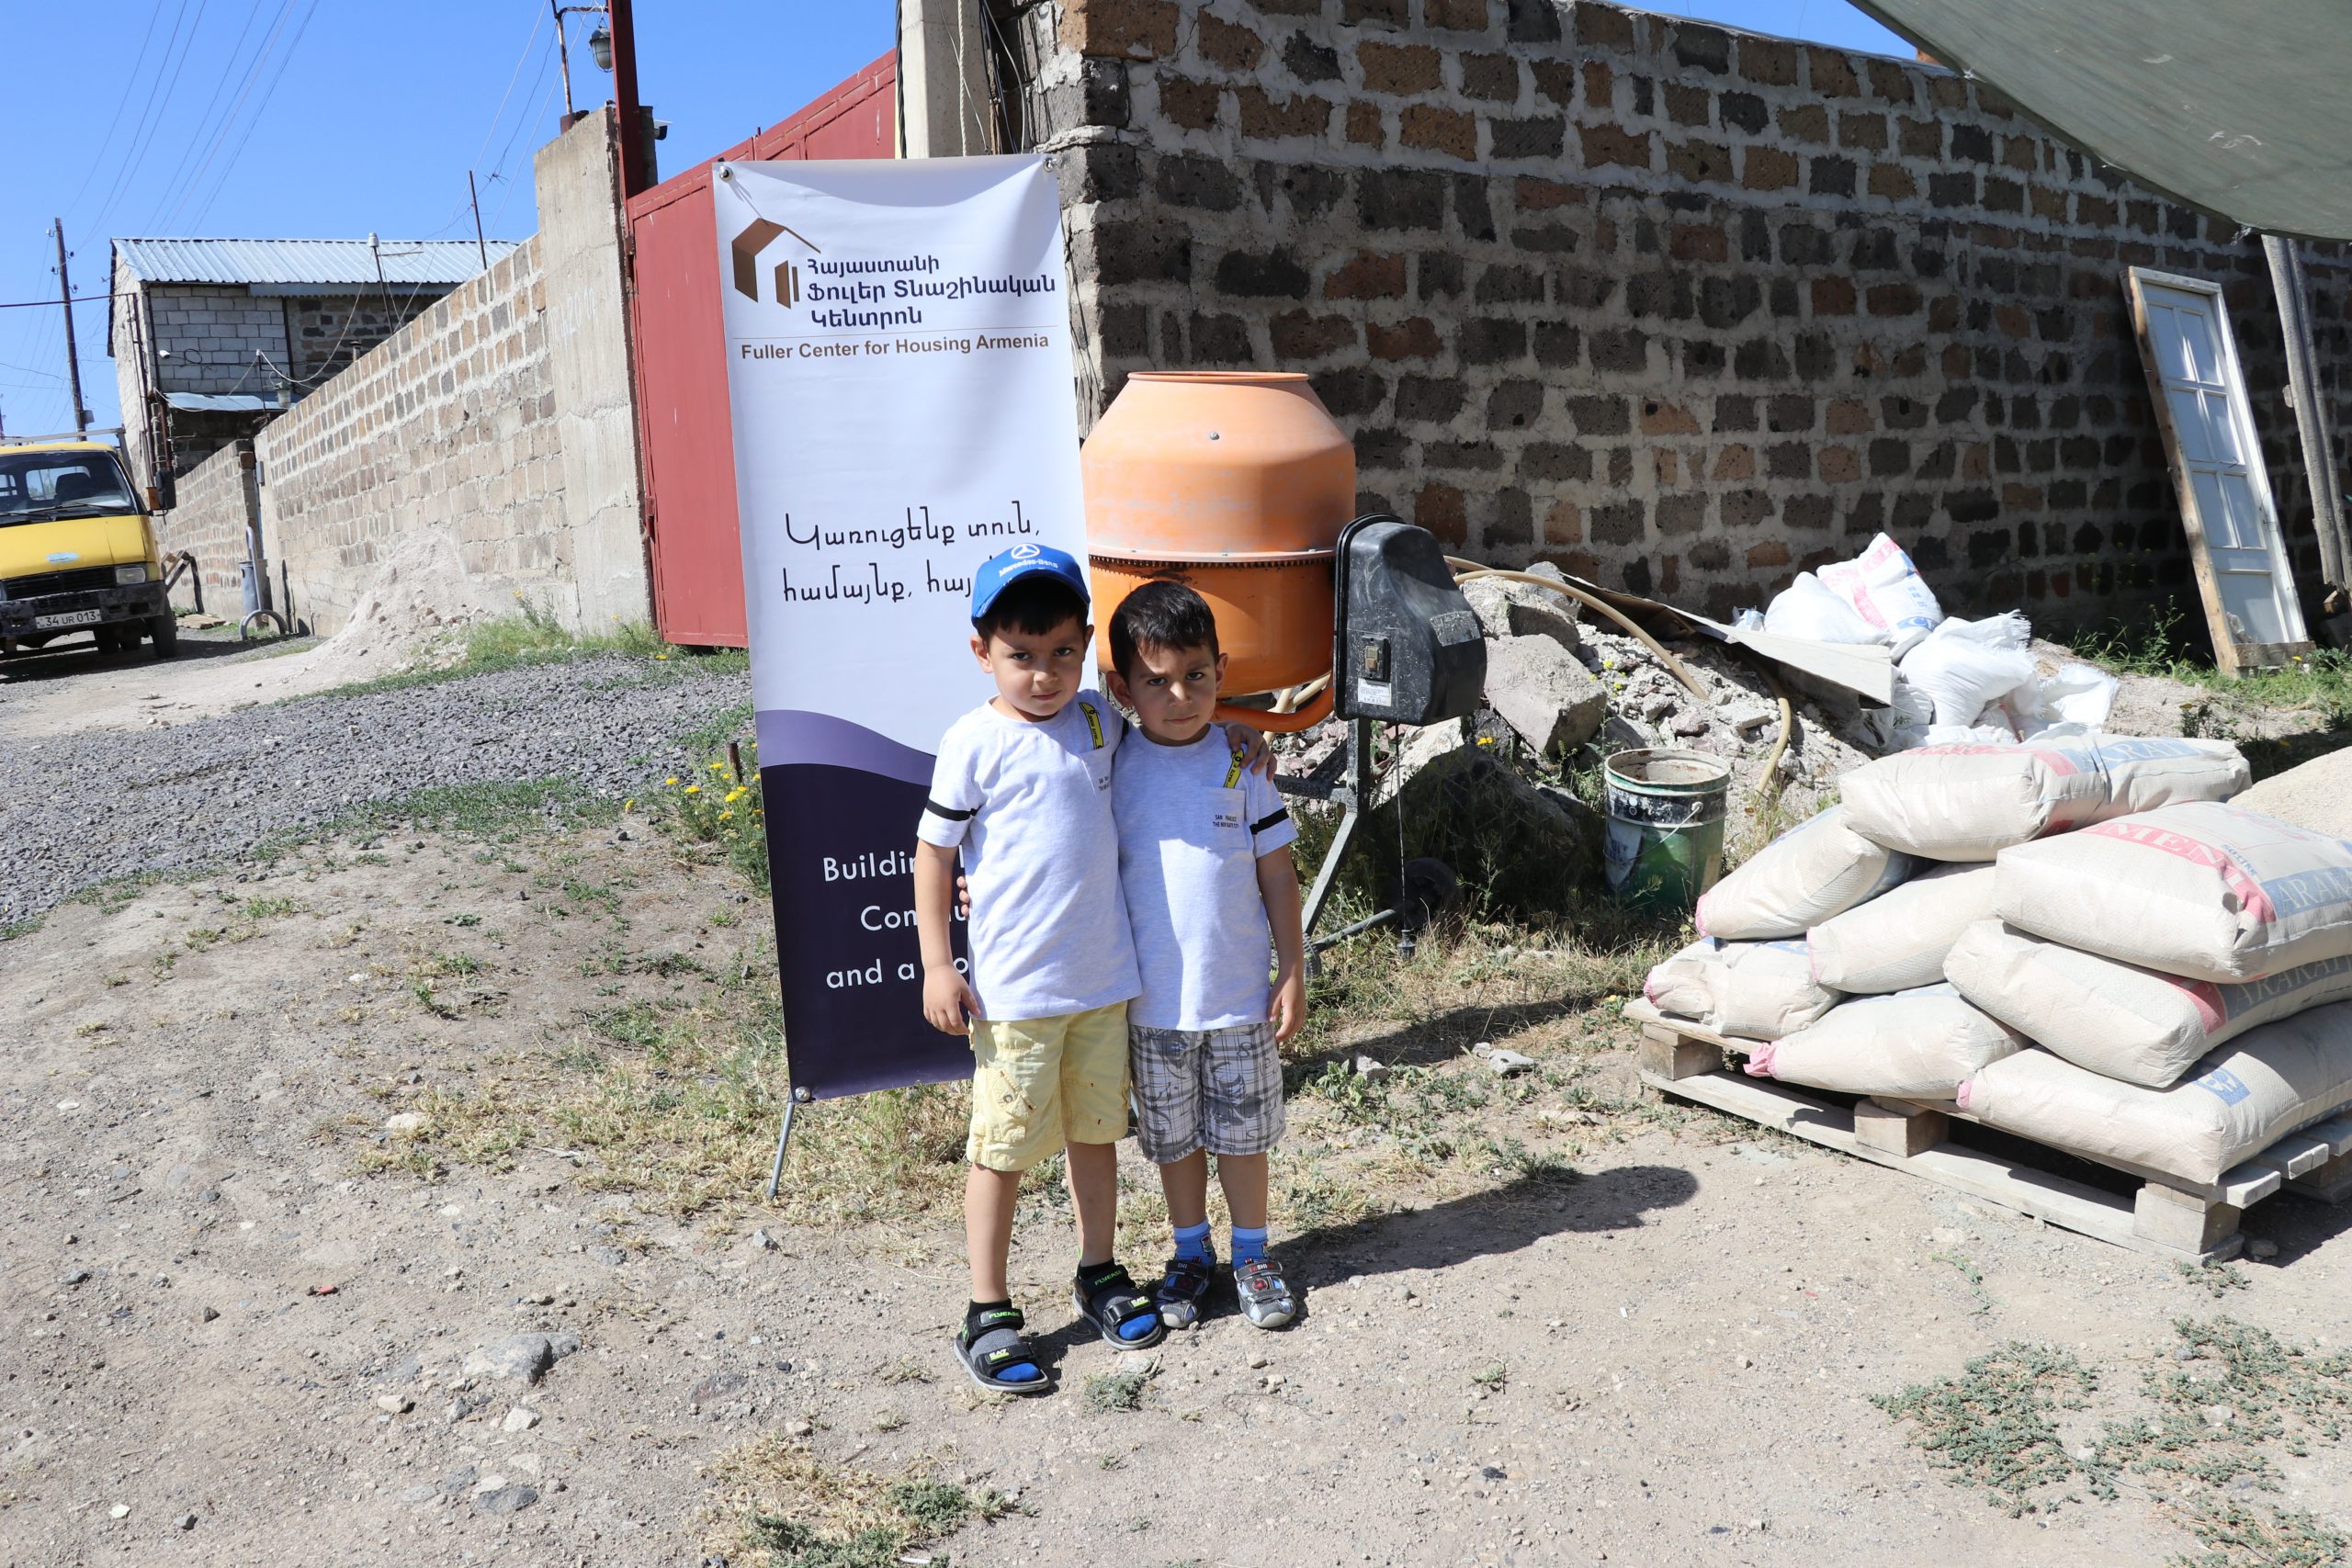 The U.S. Embassy’s Helping Hands & the Fuller Center for Housing Armenia Joined Forces  to Build a Home for a Family in Housing Need